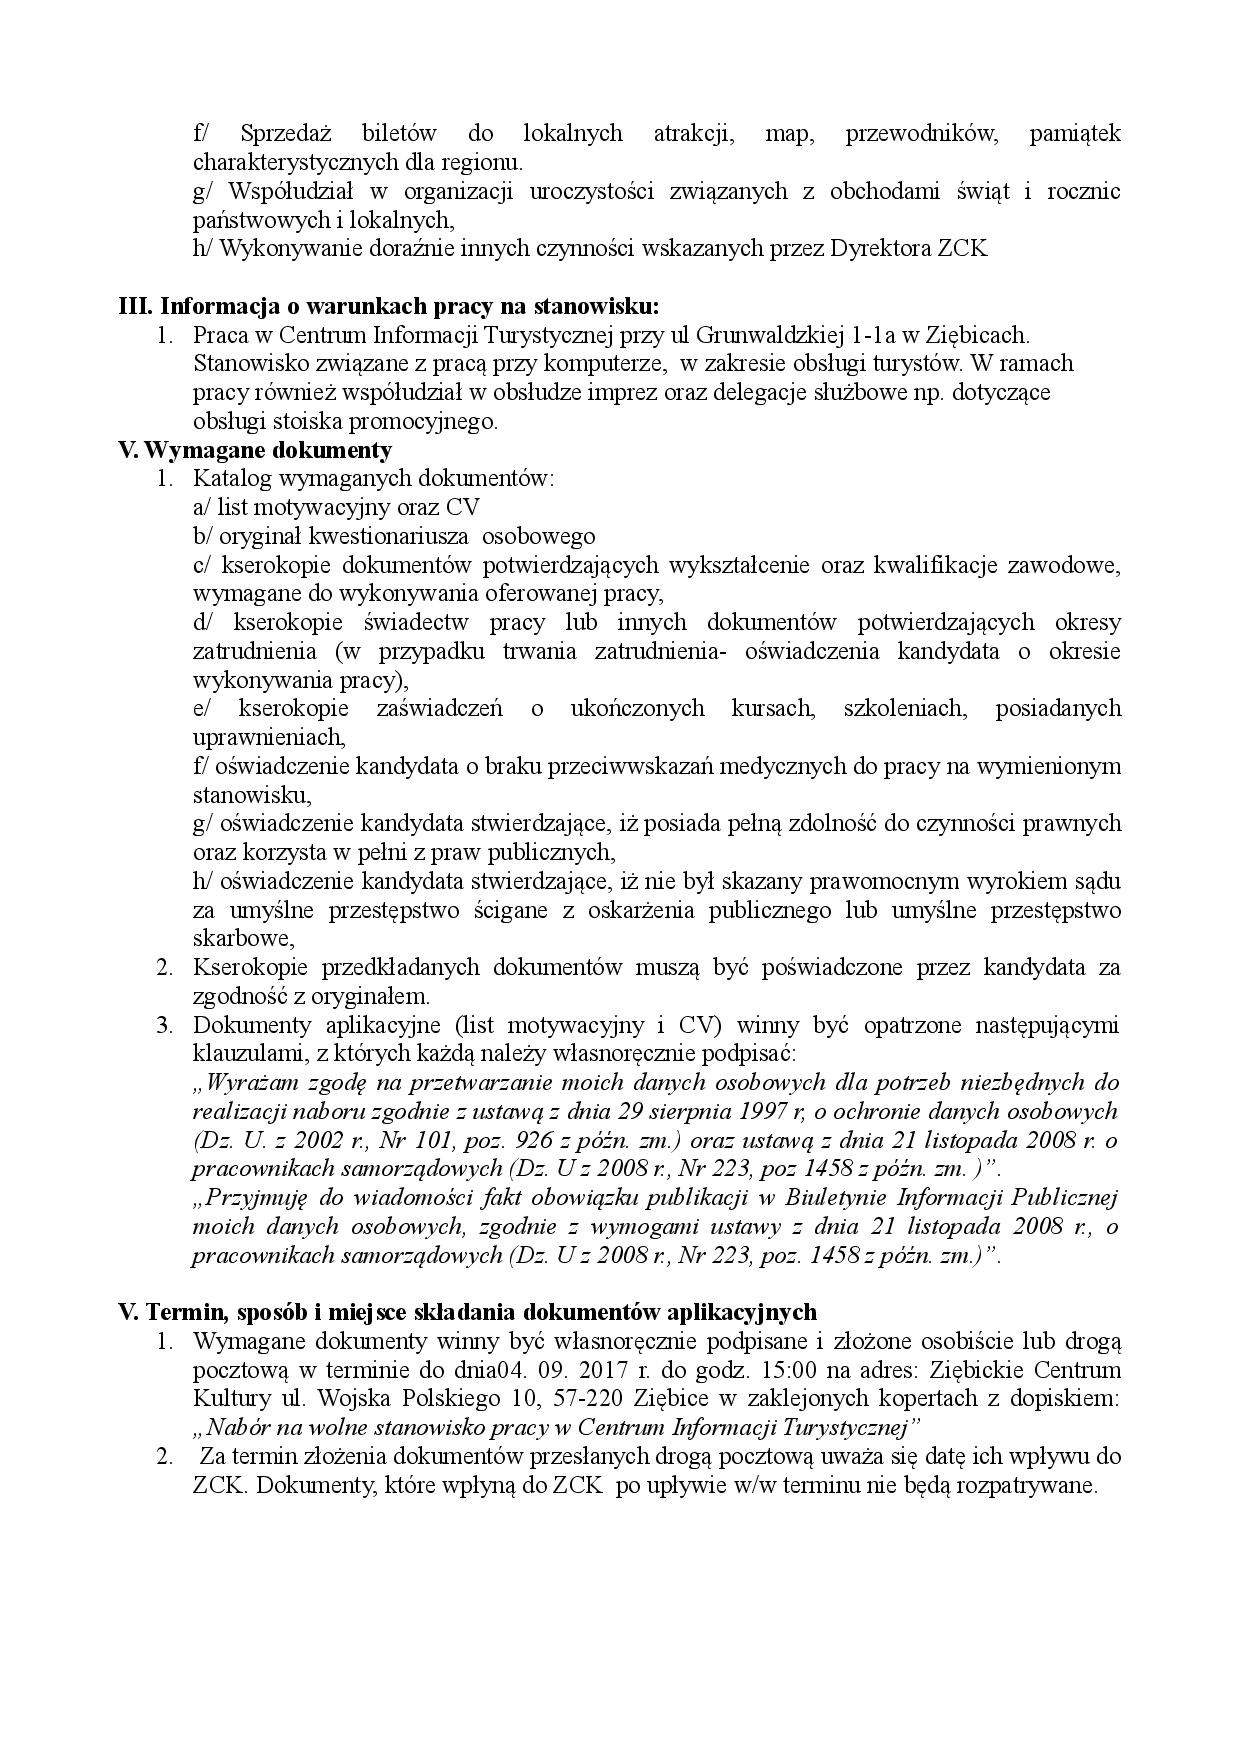 ---- Document-page-002.jpg